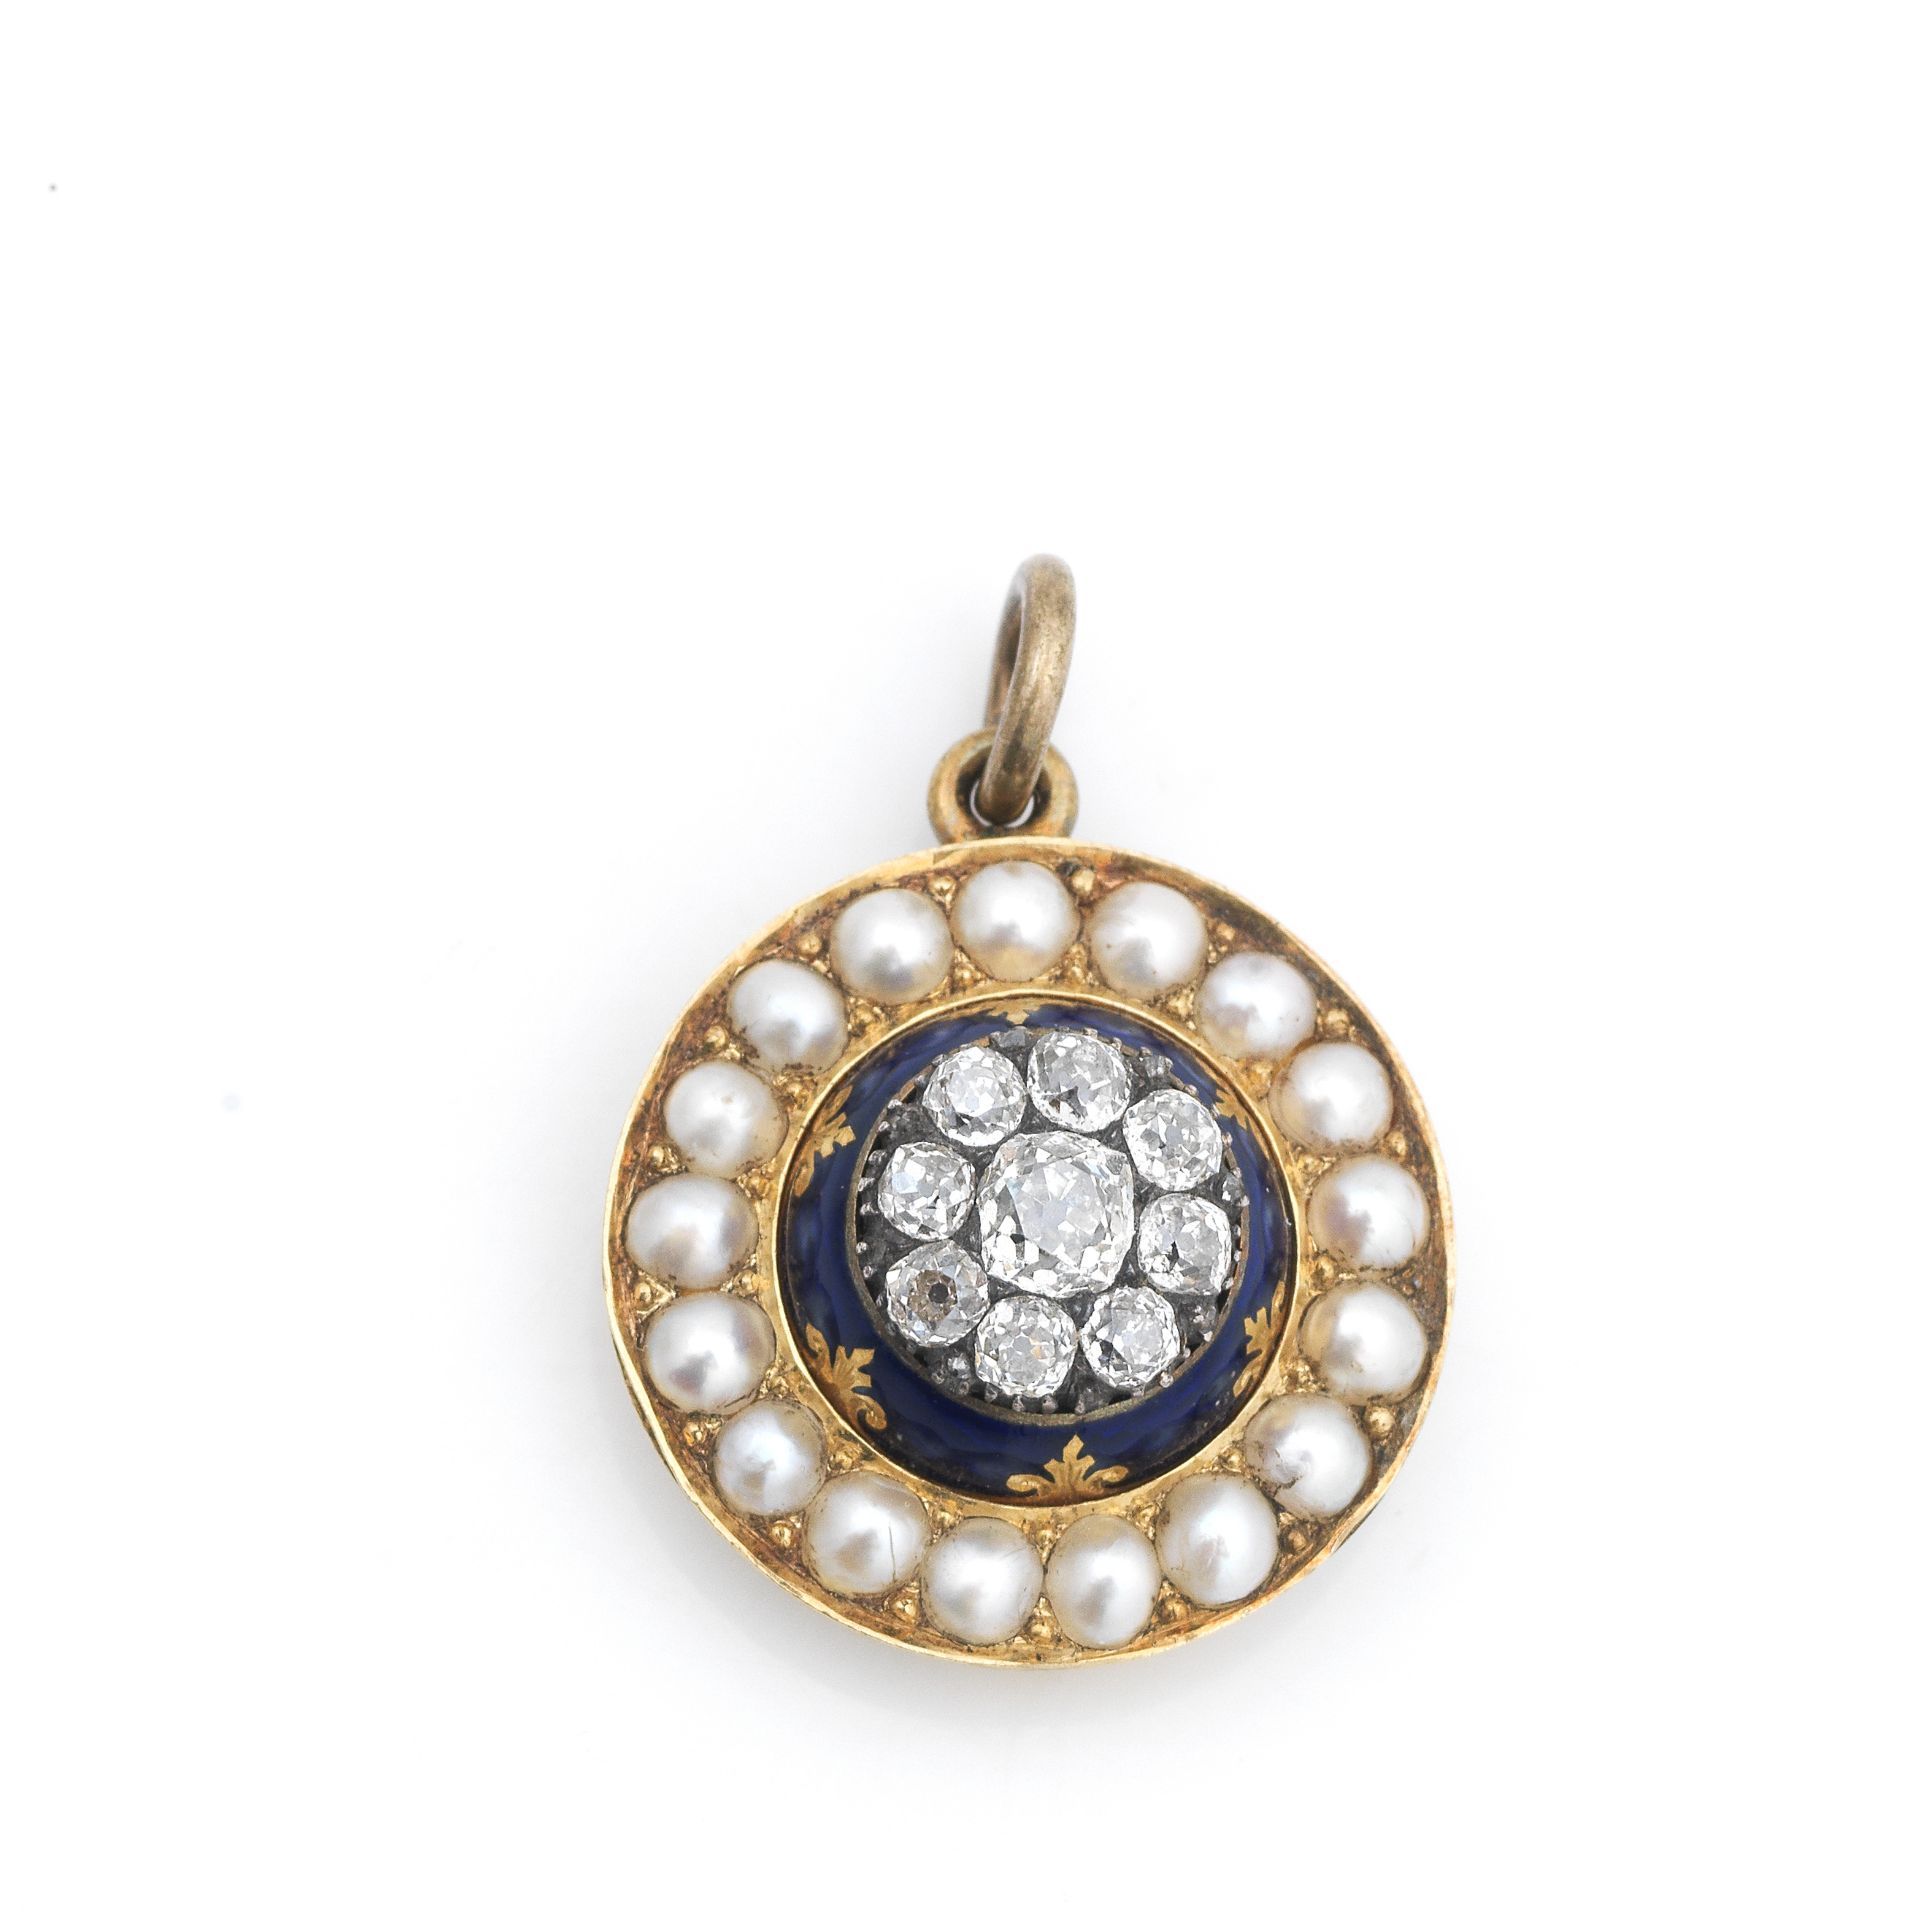 A diamond, cultured-pearl and enamelled pendant